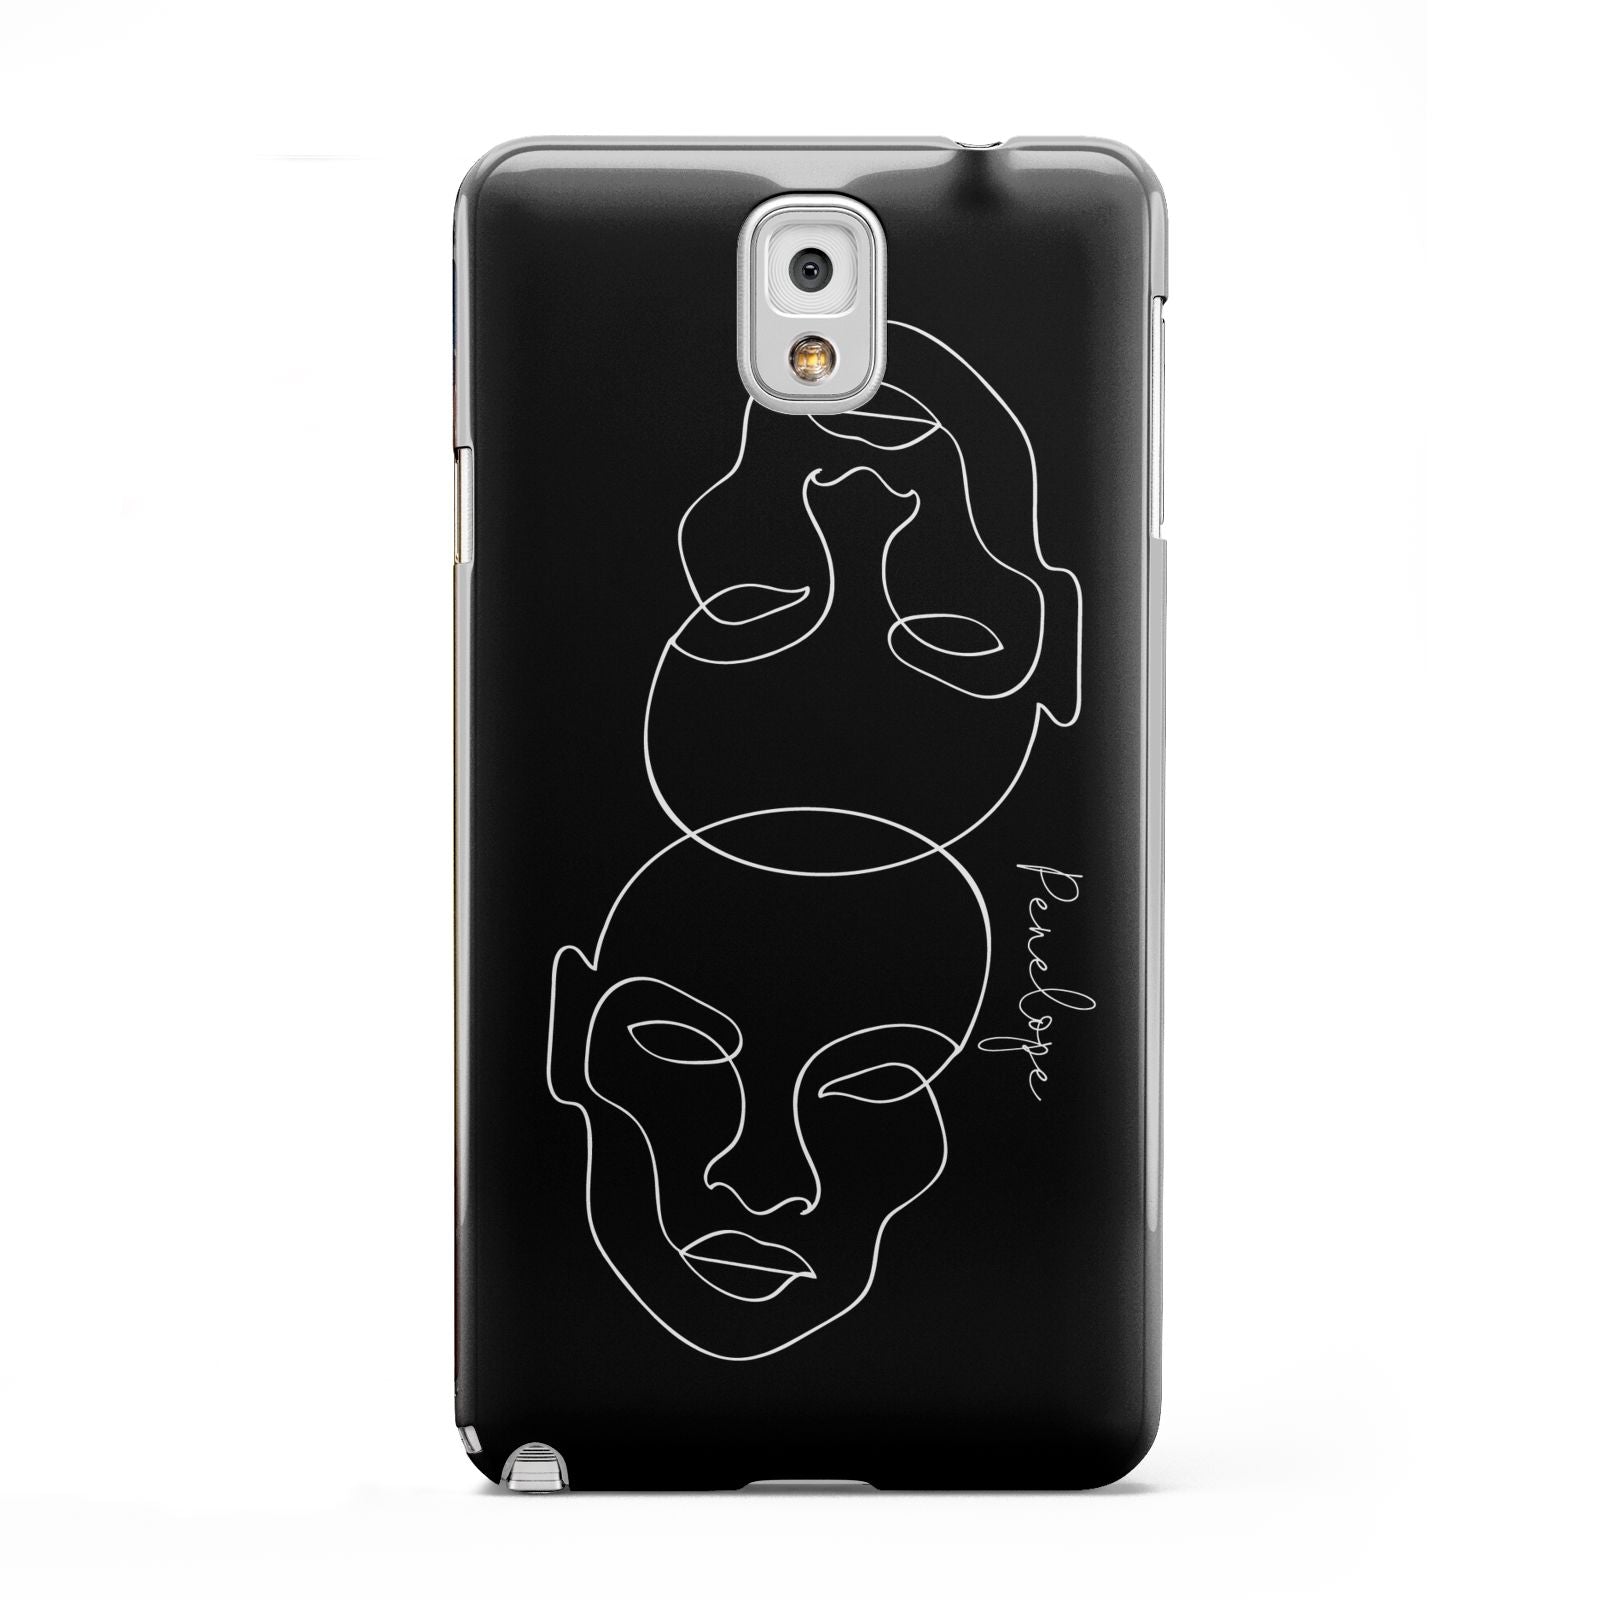 Personalised Abstract Line Art Samsung Galaxy Note 3 Case